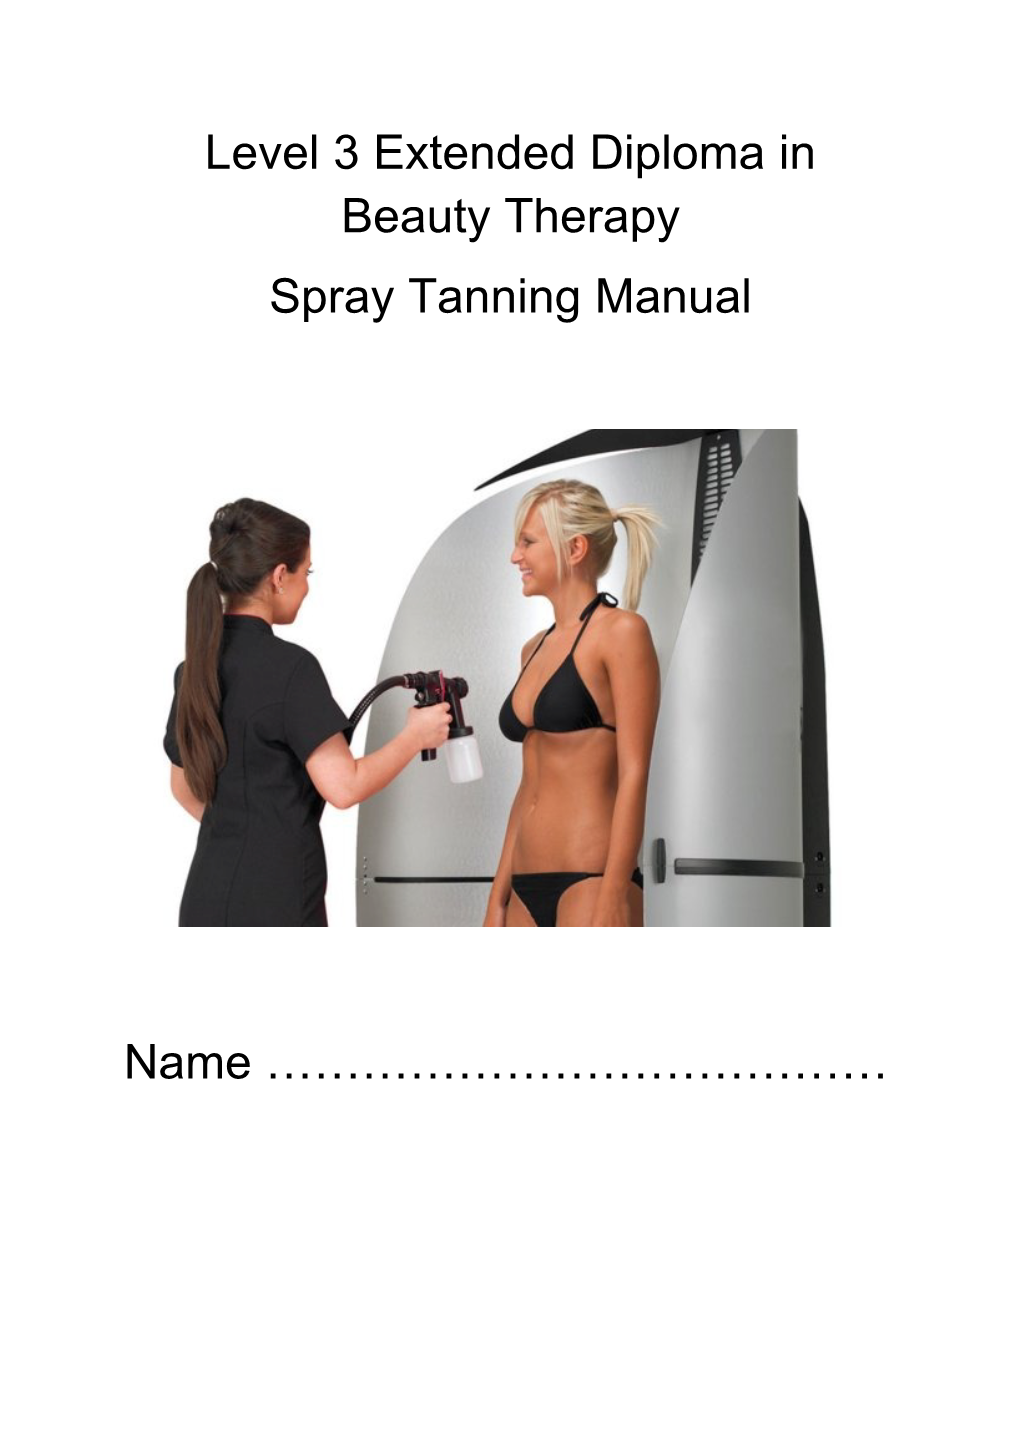 Level 3 Extended Diploma in Beauty Therapy Spray Tanning Manual